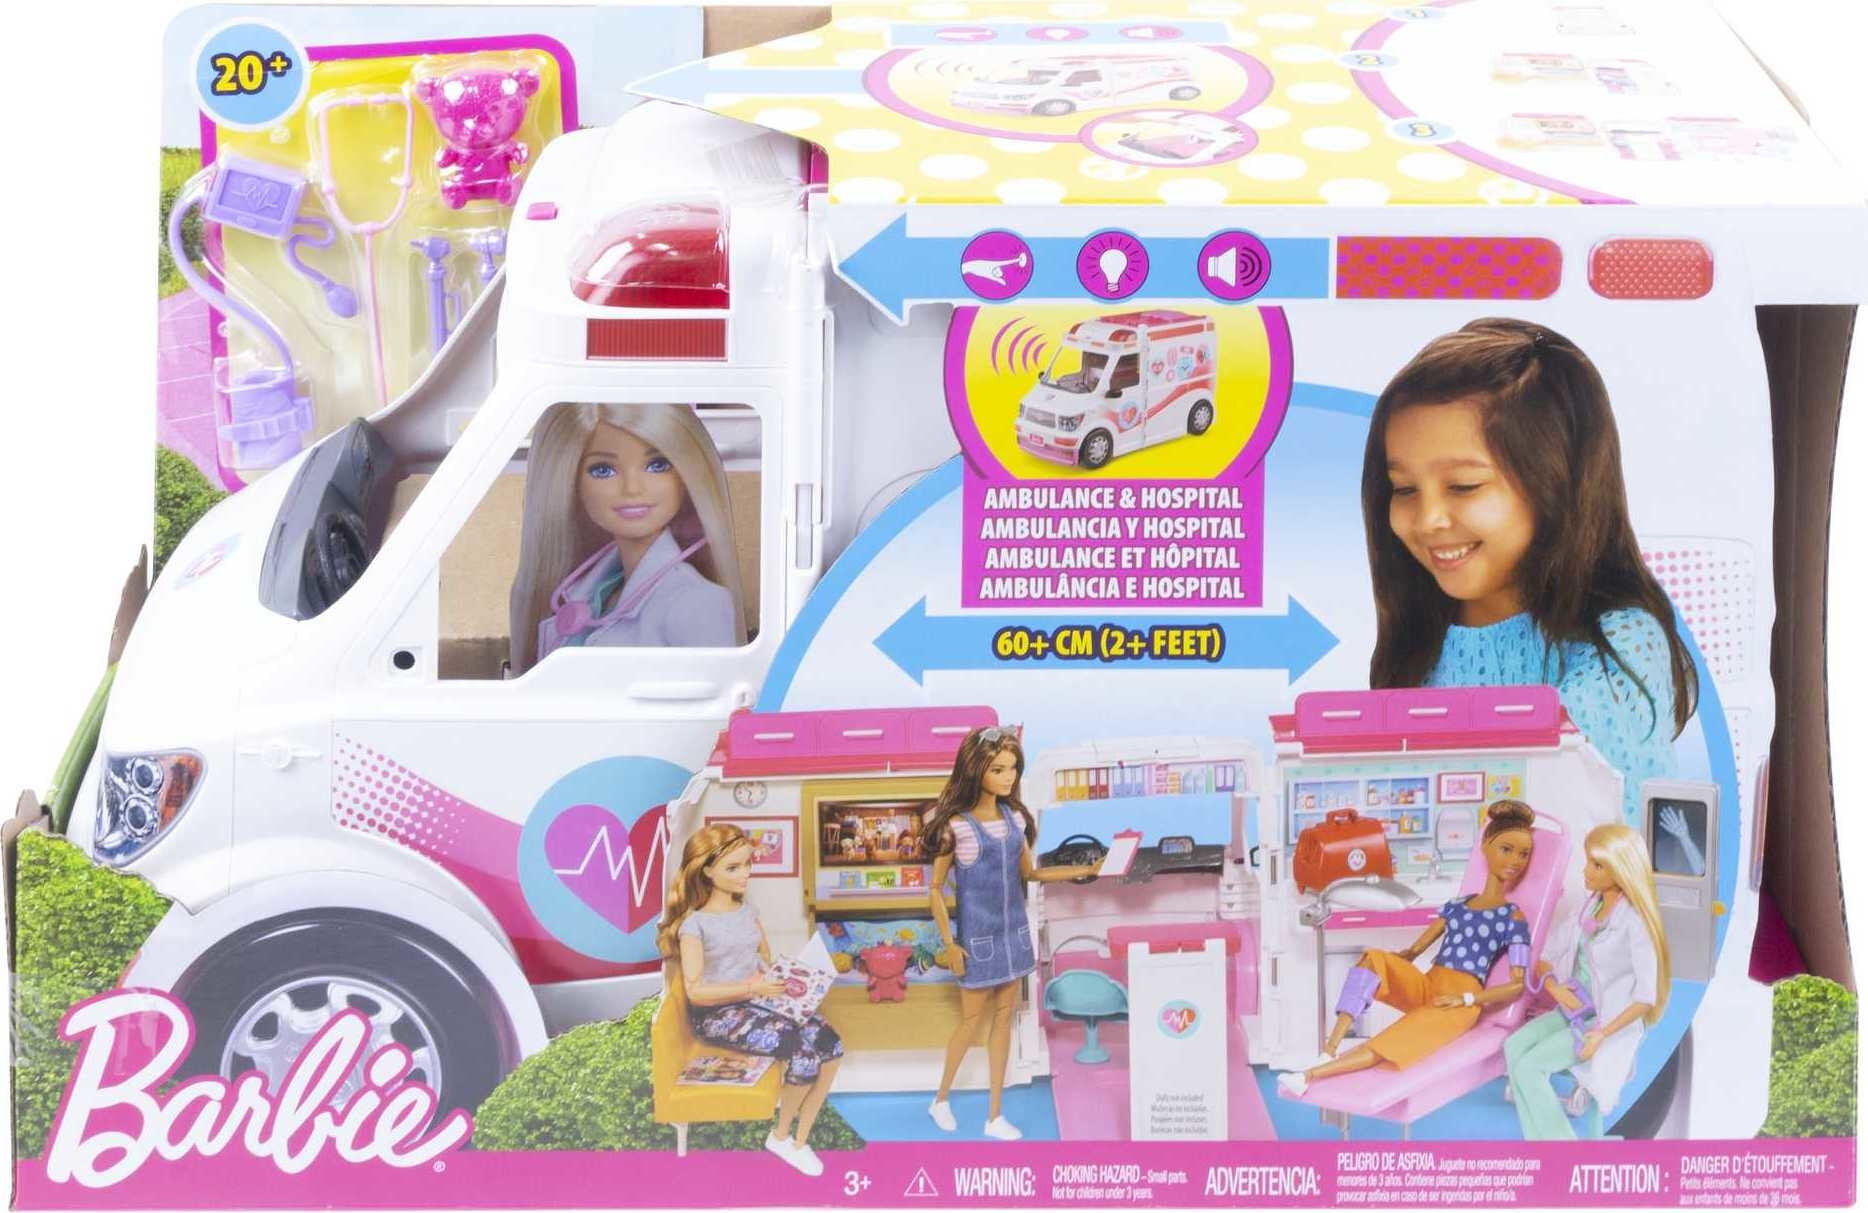 Jobs Role Model Toy Barbie Care Clinic Playset & DVF57 CAREERS Nurse Role Play Gift for 4 to 9 Years Children Dolls